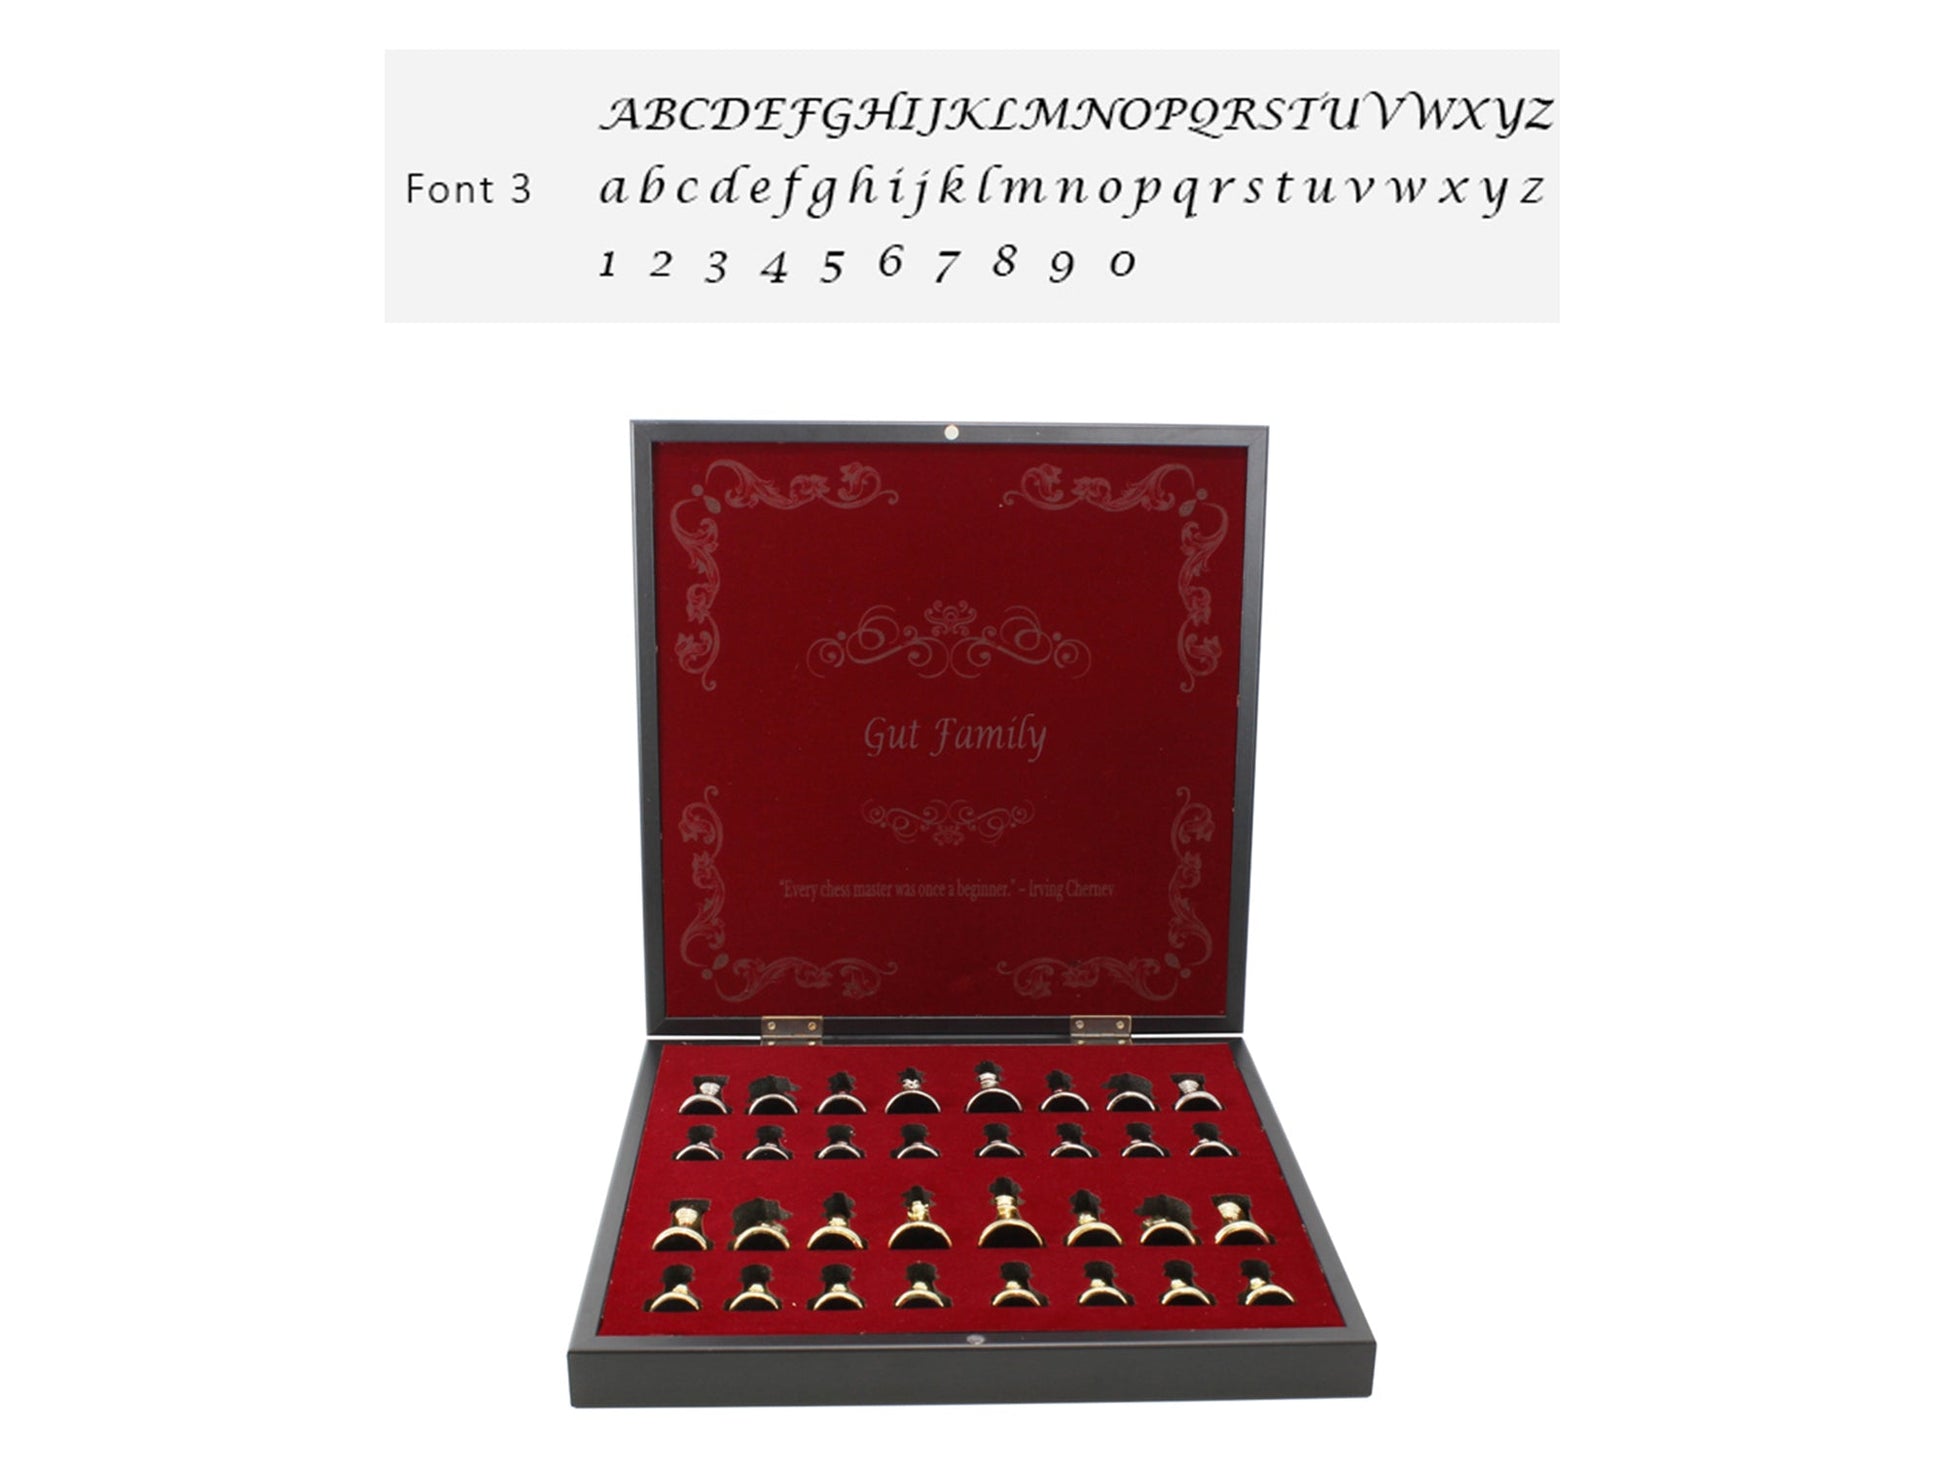 Customized Chess Set with Font 3